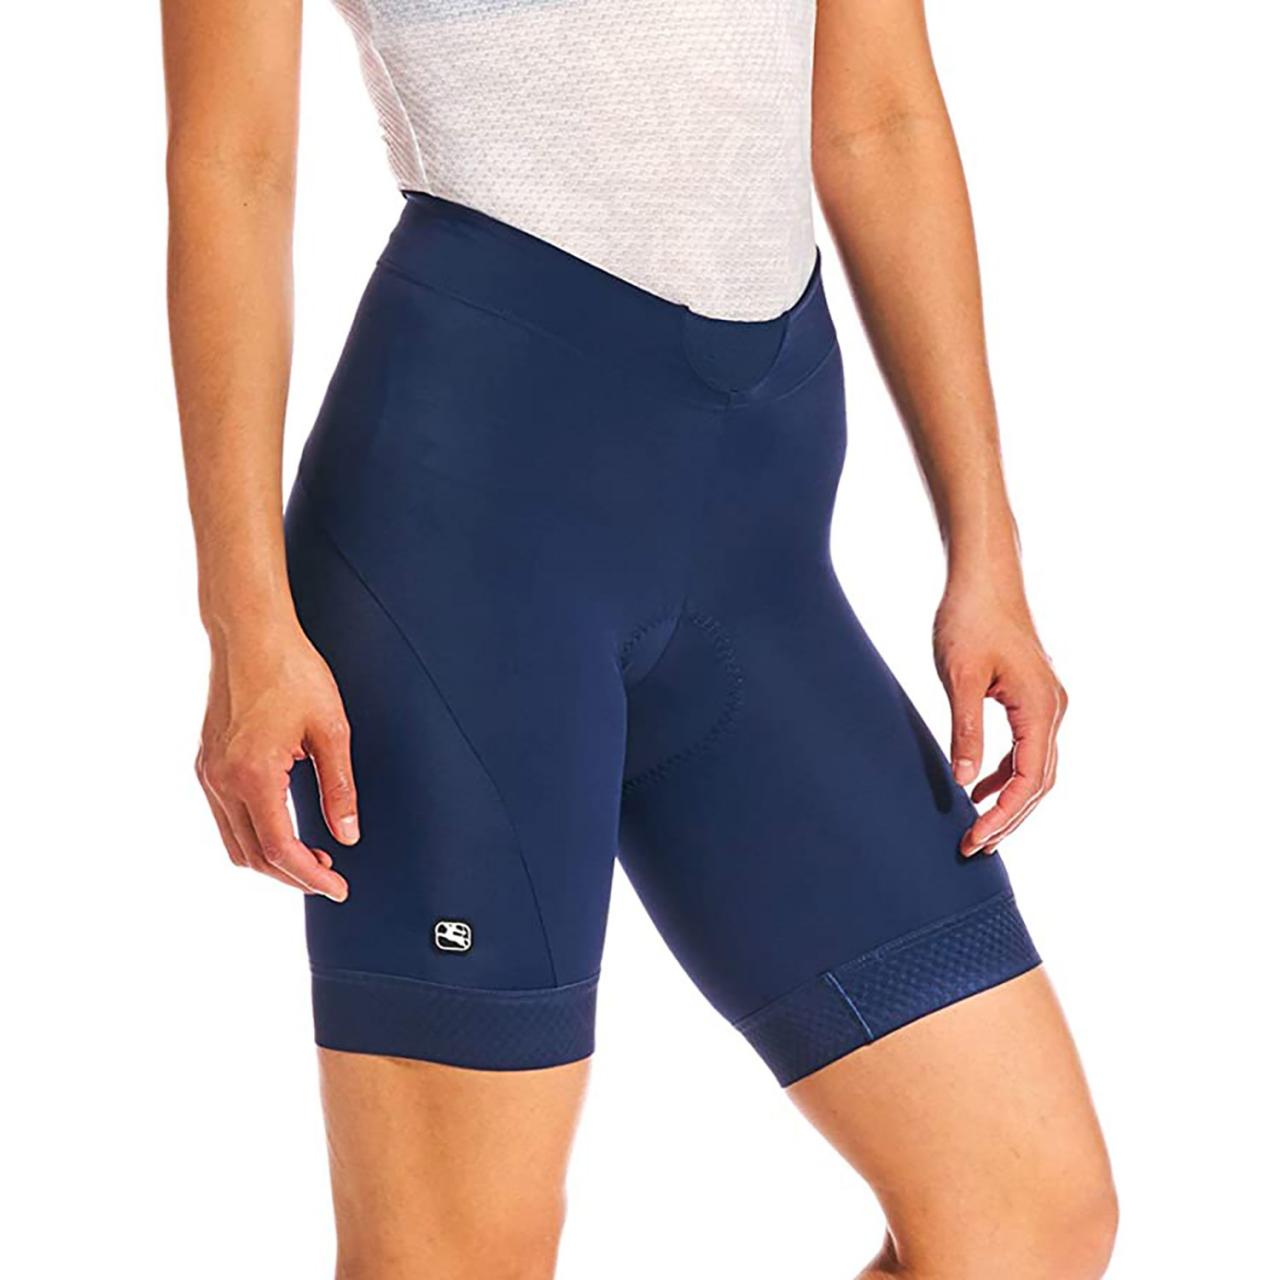 The Best Padded Bike Shorts to Make Your Rides Way More Comfy | Shape